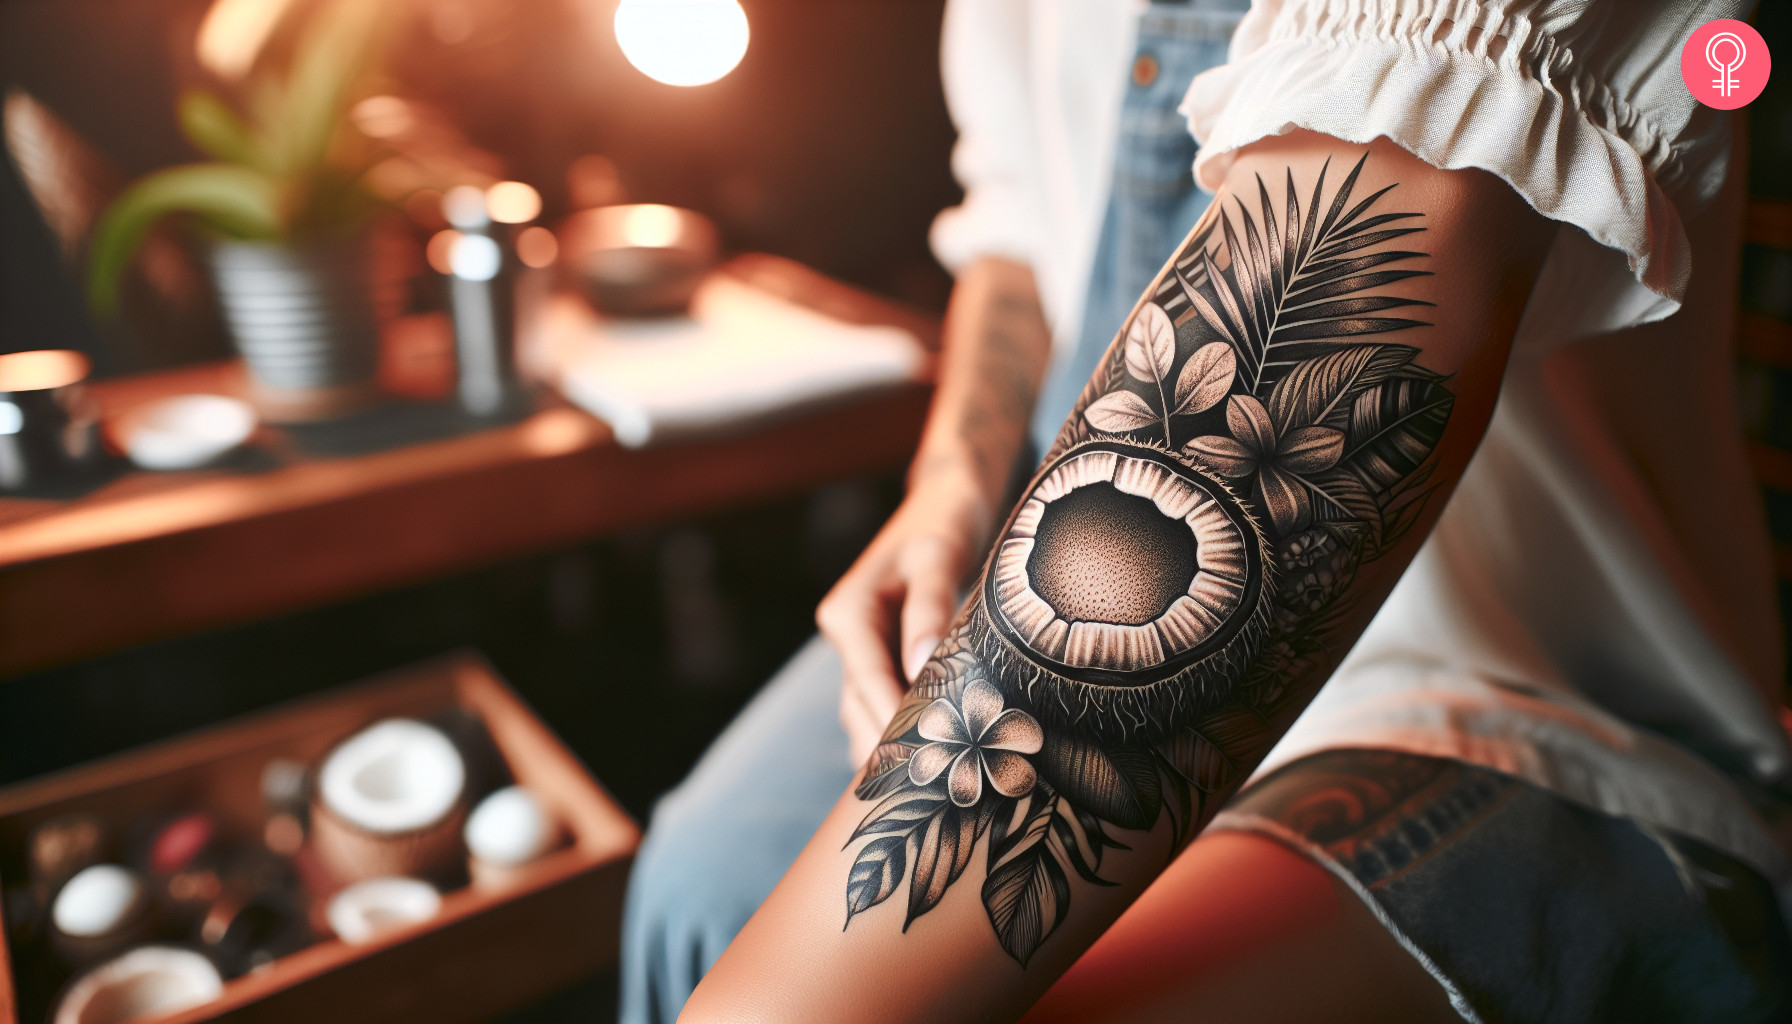 A coconut tattoo on the forearm